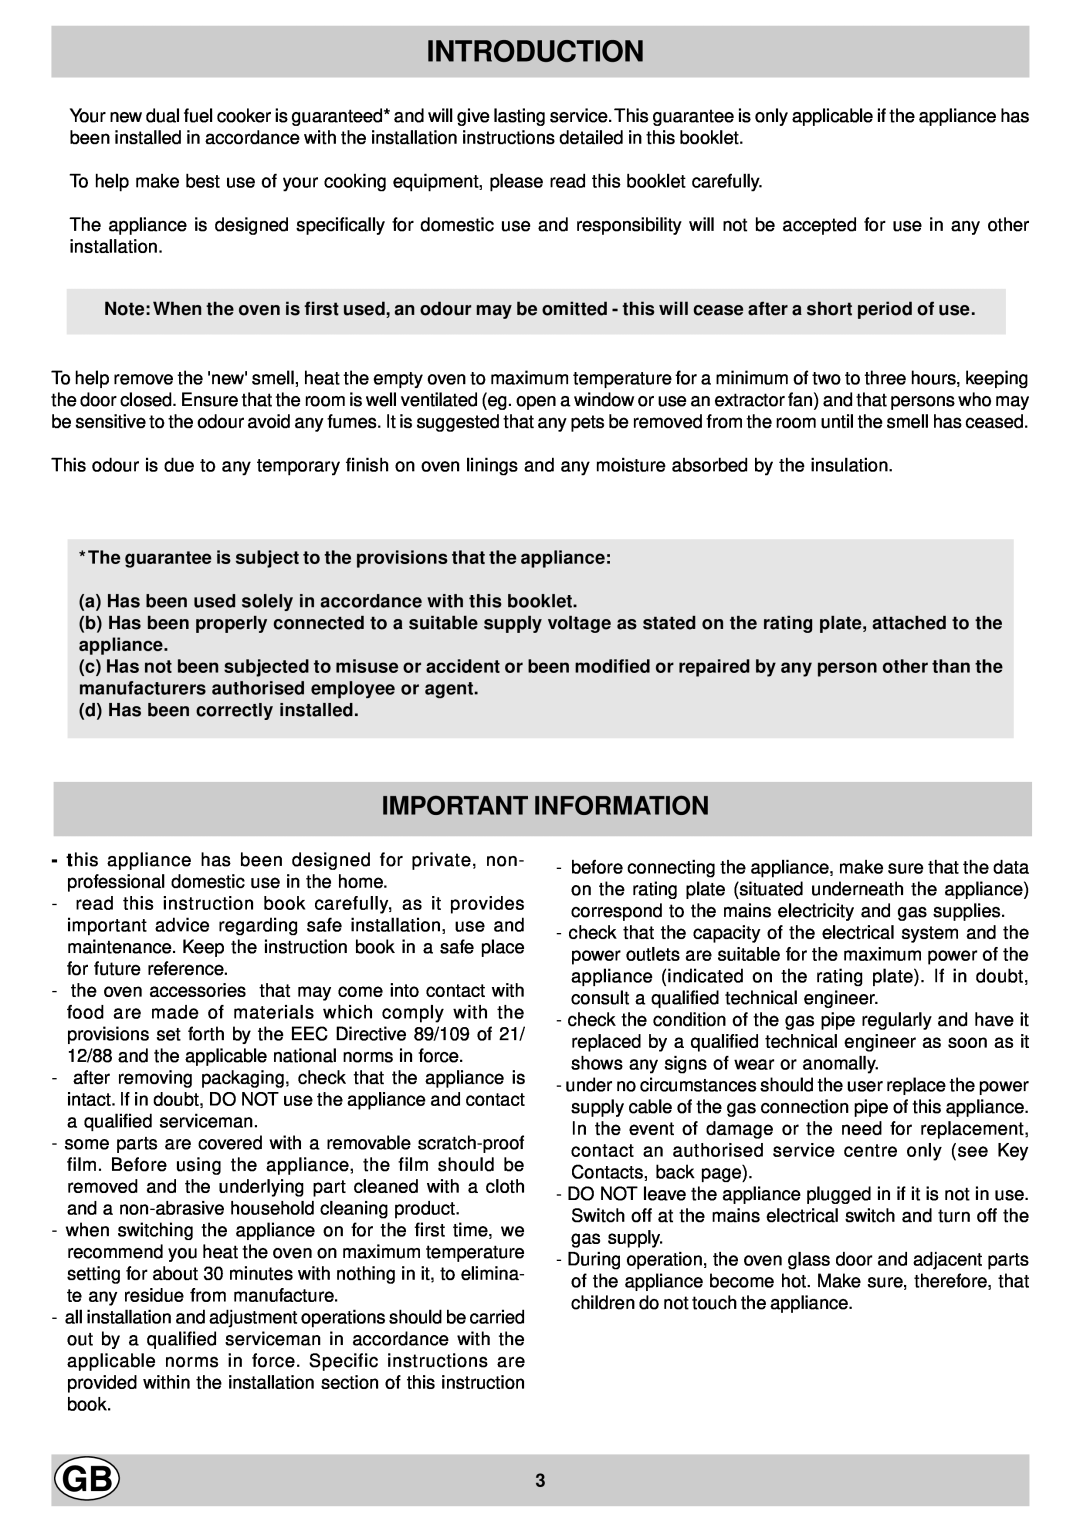 Hotpoint EG900X manual Introduction, Important Information, The guarantee is subject to the provisions that the appliance 